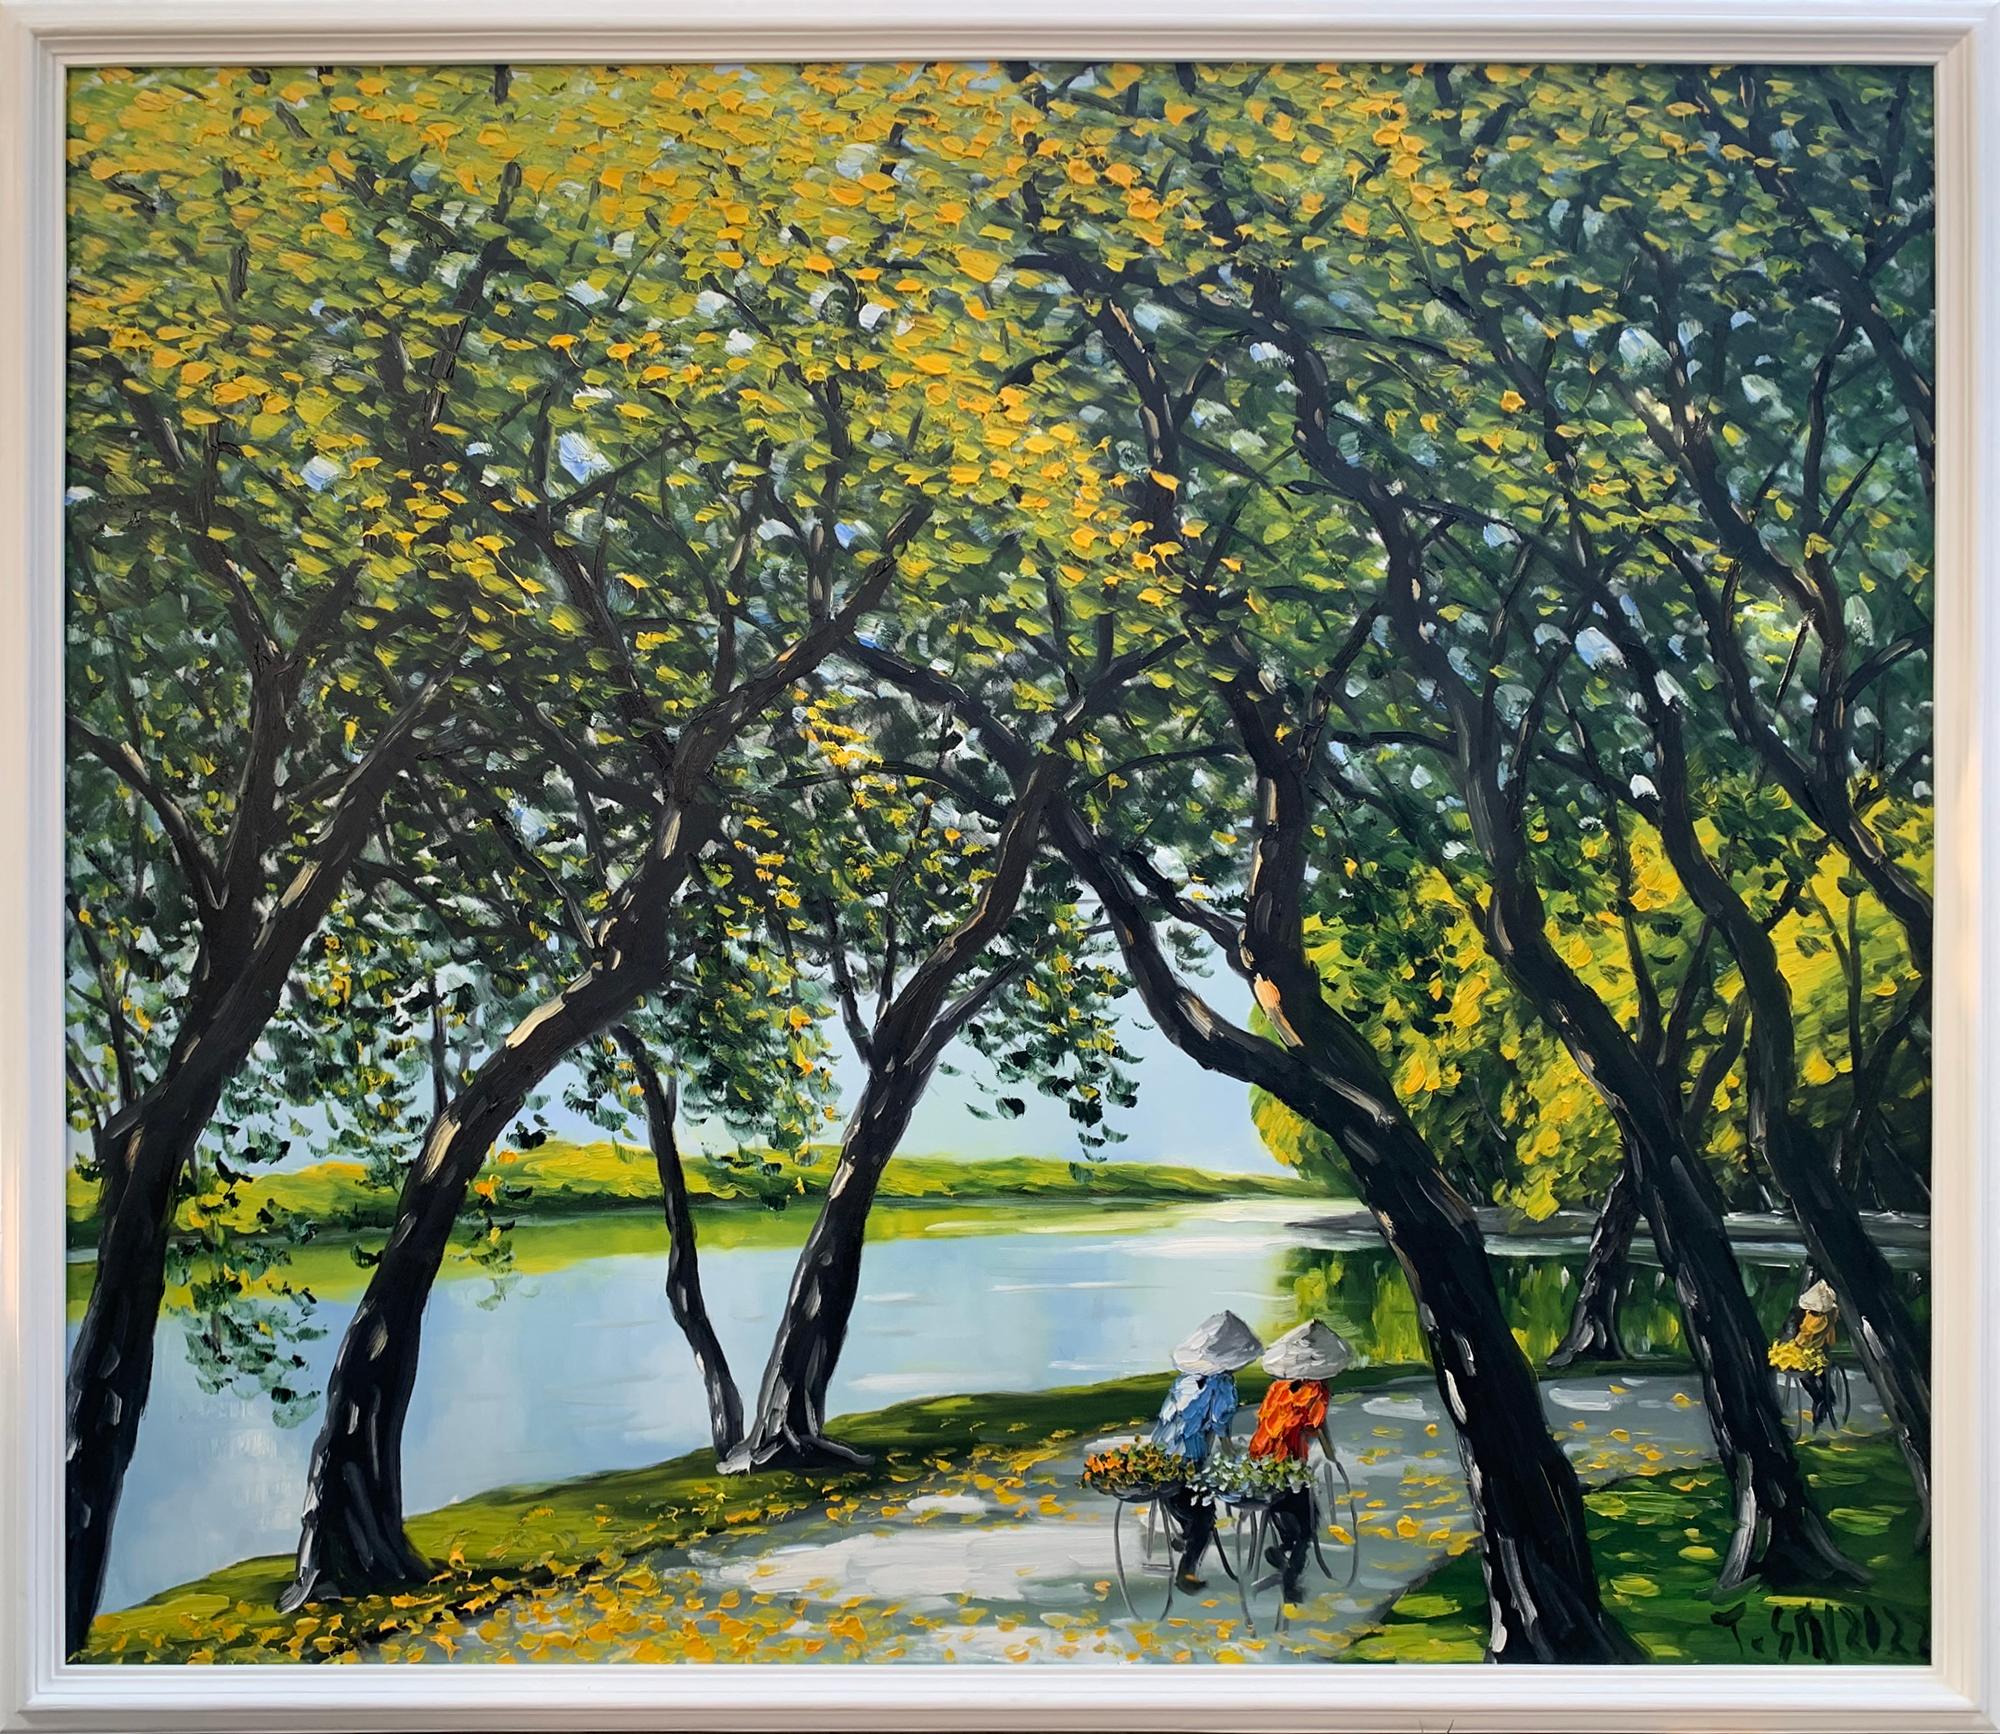 Le Thanh Son Landscape Painting - 'Riding by the Lake' Colorful Impressionist Painting